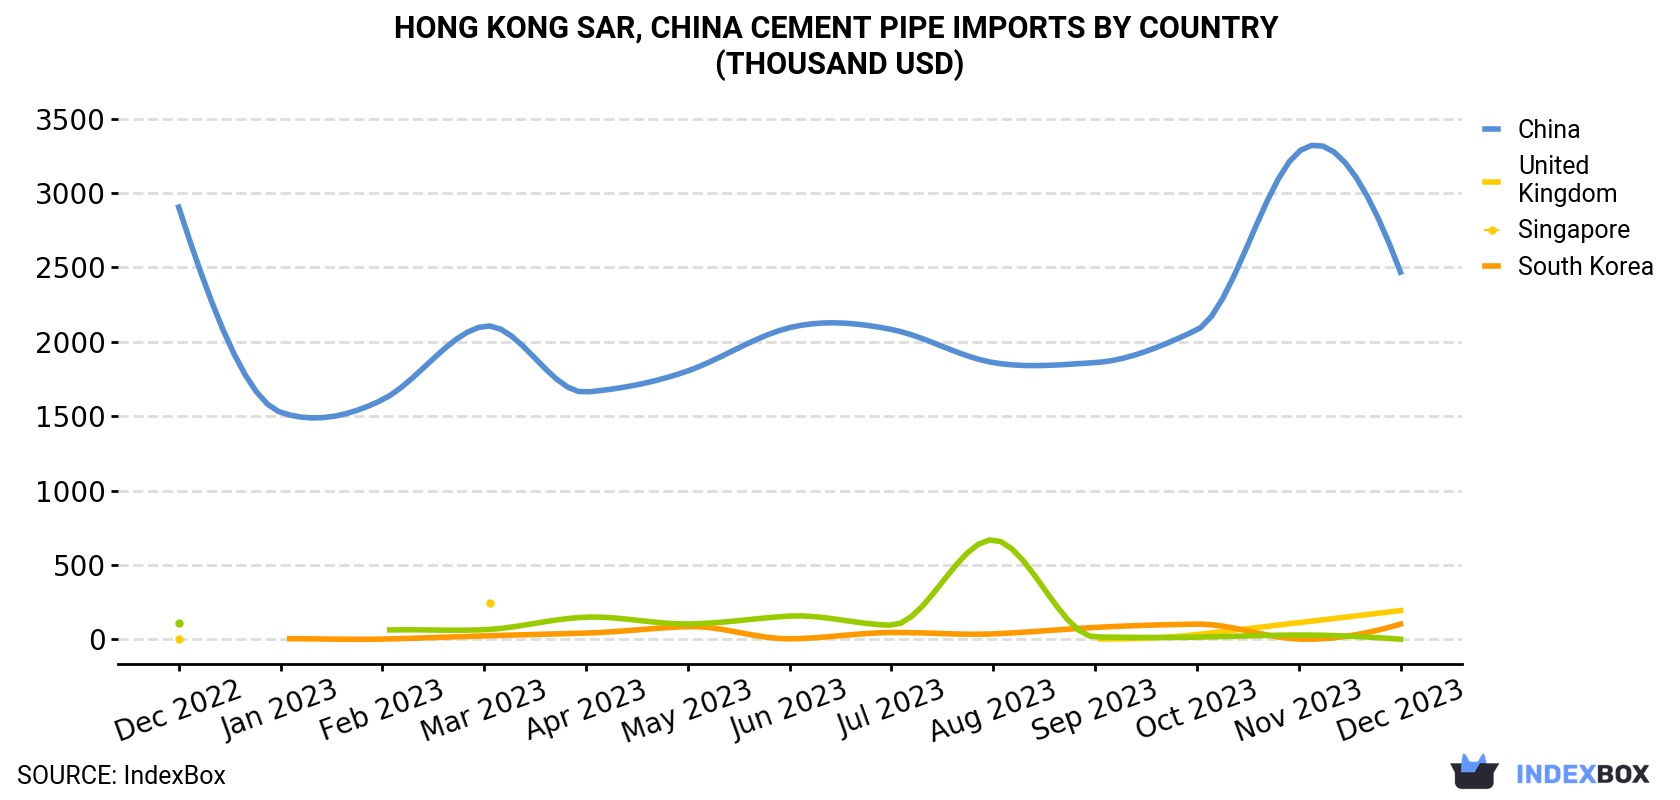 Hong Kong Cement Pipe Imports By Country (Thousand USD)